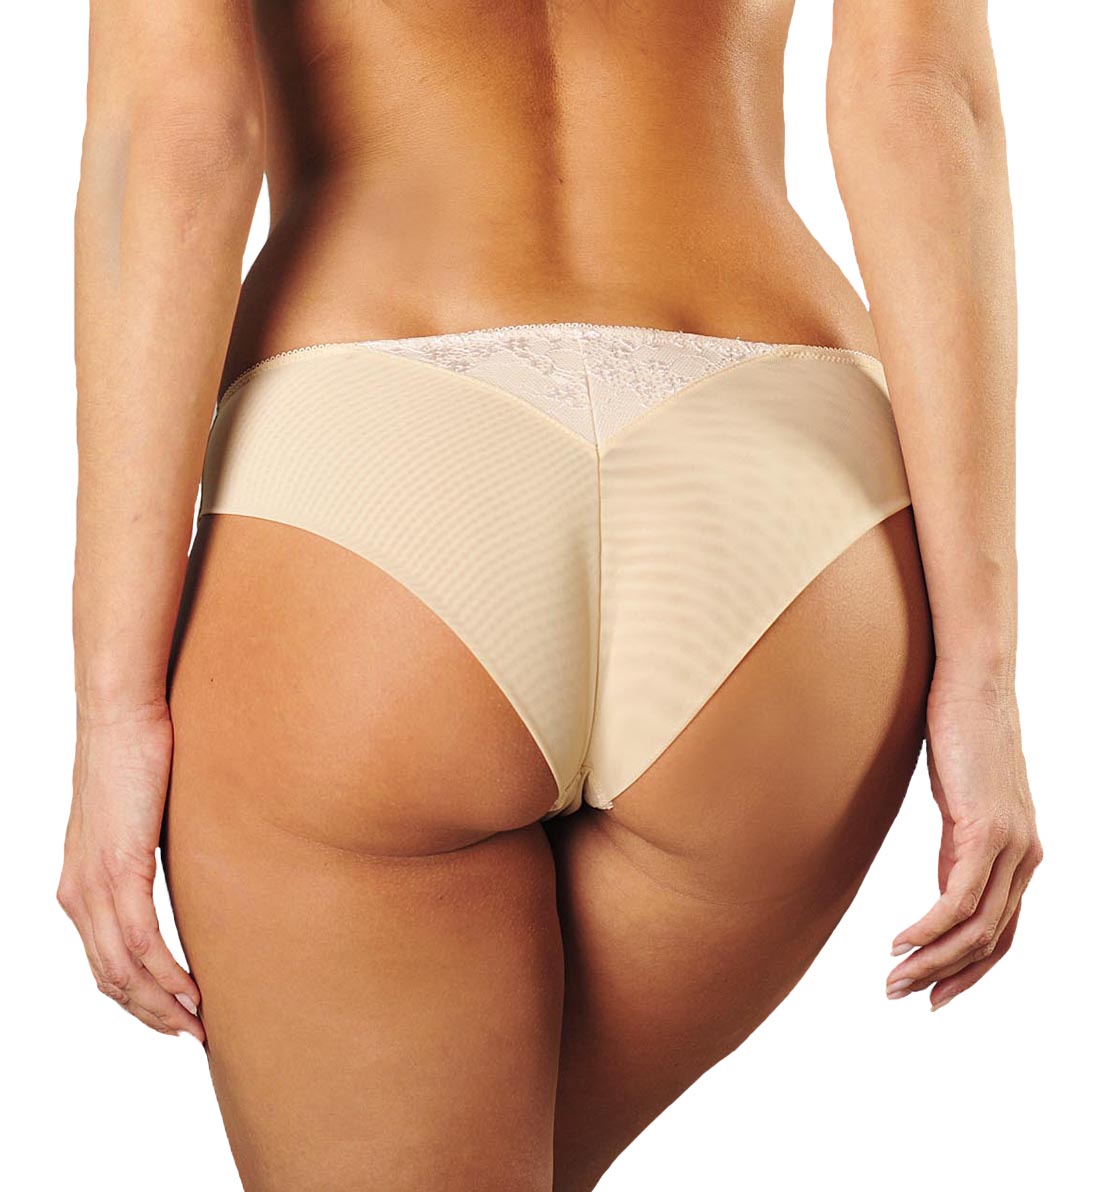 Comexim Ginger Cookie Matching Shorty (CMGINGERMS),Small,Nude Lace - Nude Lace,Small